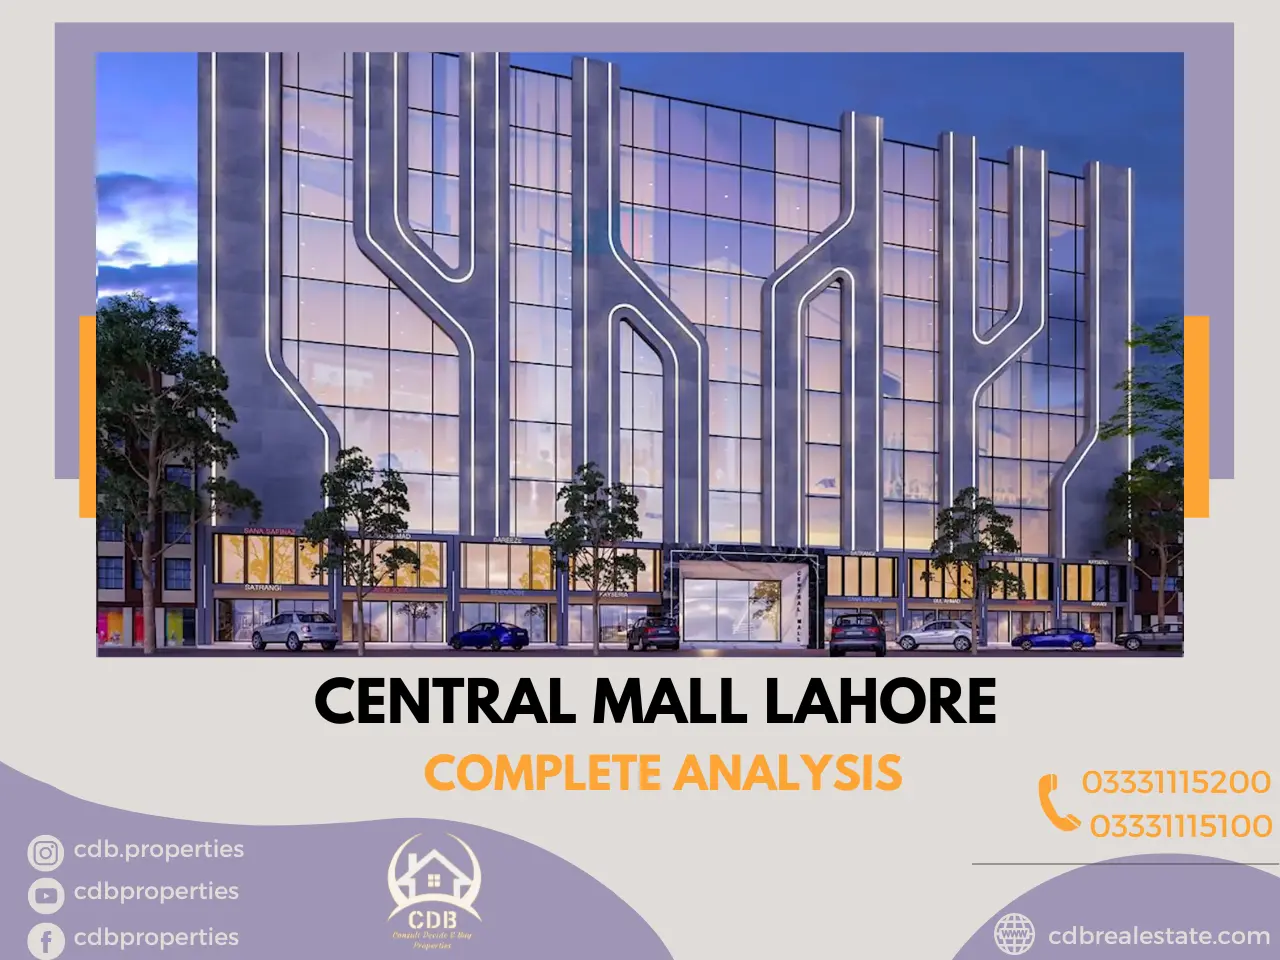 Central Mall Lahore